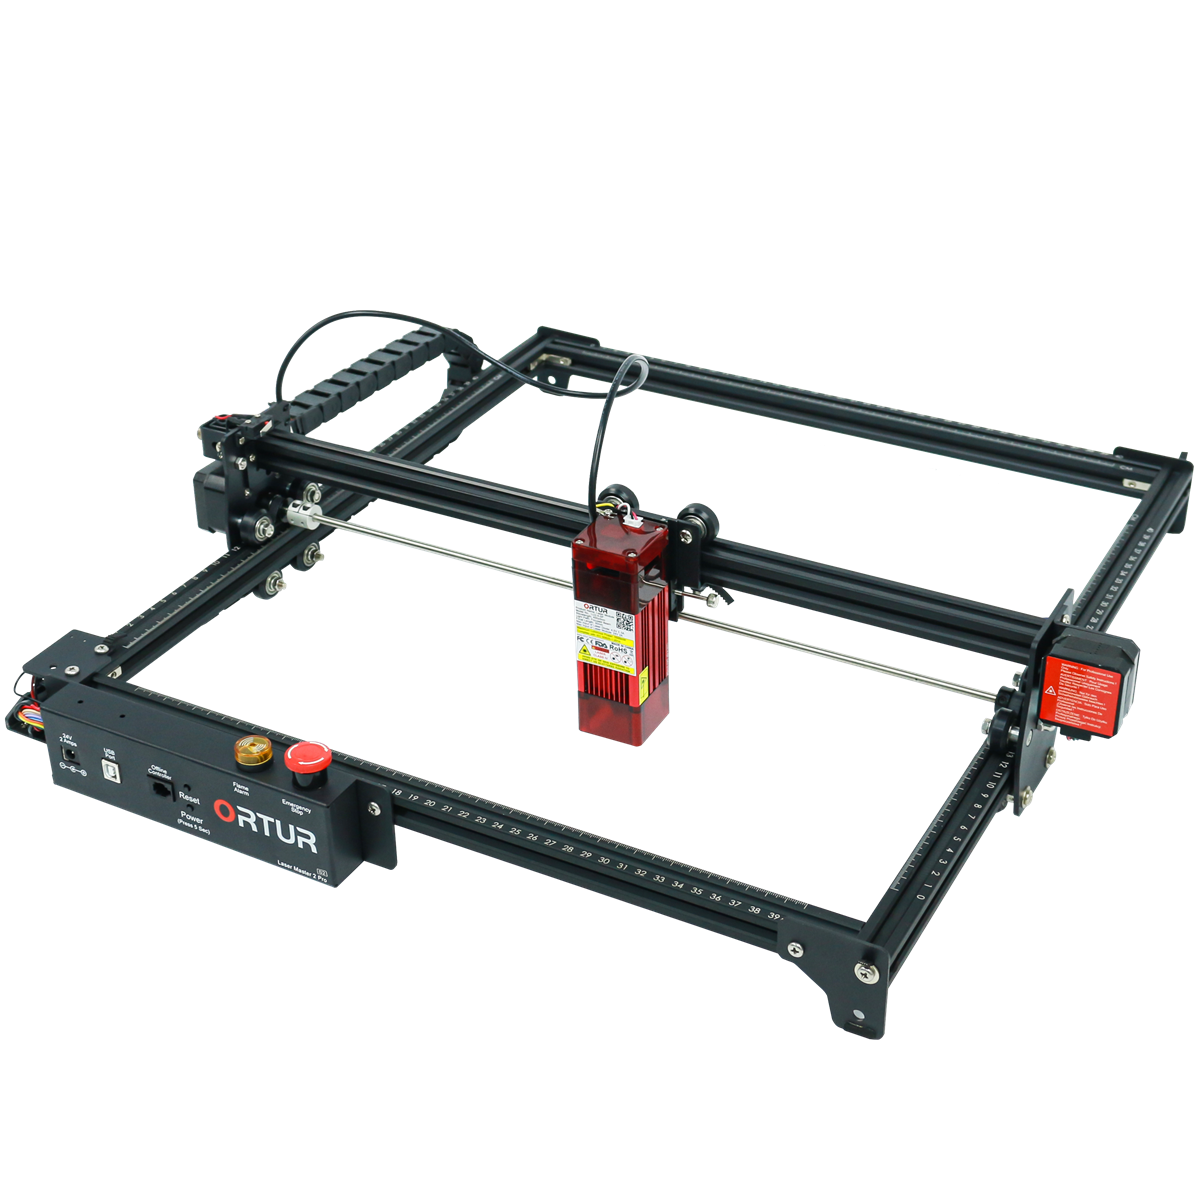 Find ORTUR Laser Master 2 Pro S2 LU2-4 LF SF Laser Engraving Cutting Machine Cutter 400 x 430mm Large Engraving Area Fast Speed 10,000mm/Min High Precision Laser Engraver for Sale on Gipsybee.com with cryptocurrencies